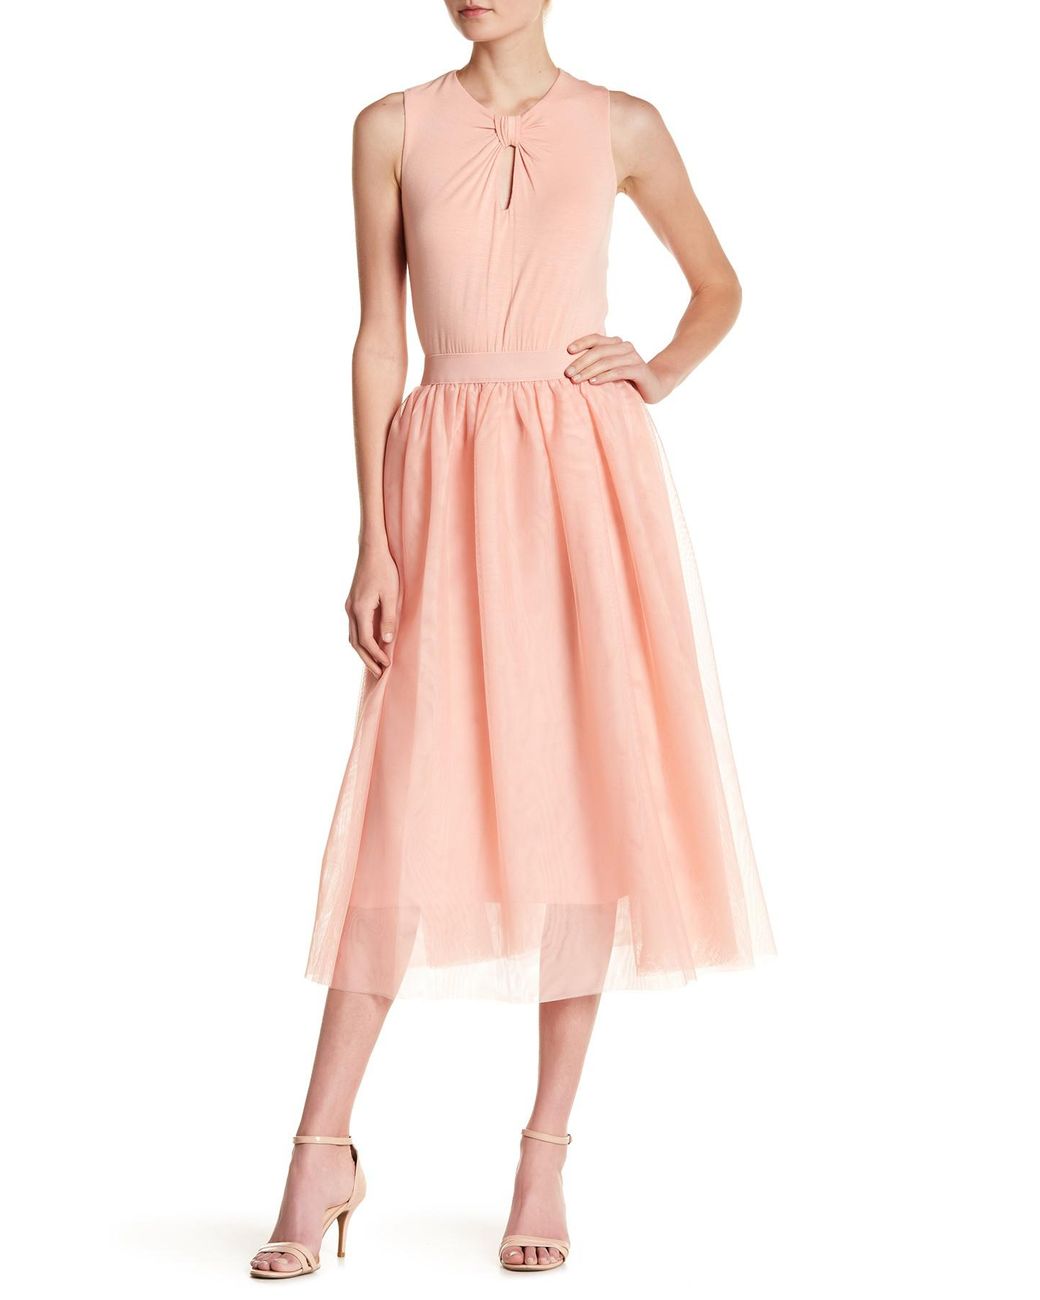 HOPE AND HARLOW Tulle Skirt Midi Dress in Pink | Lyst